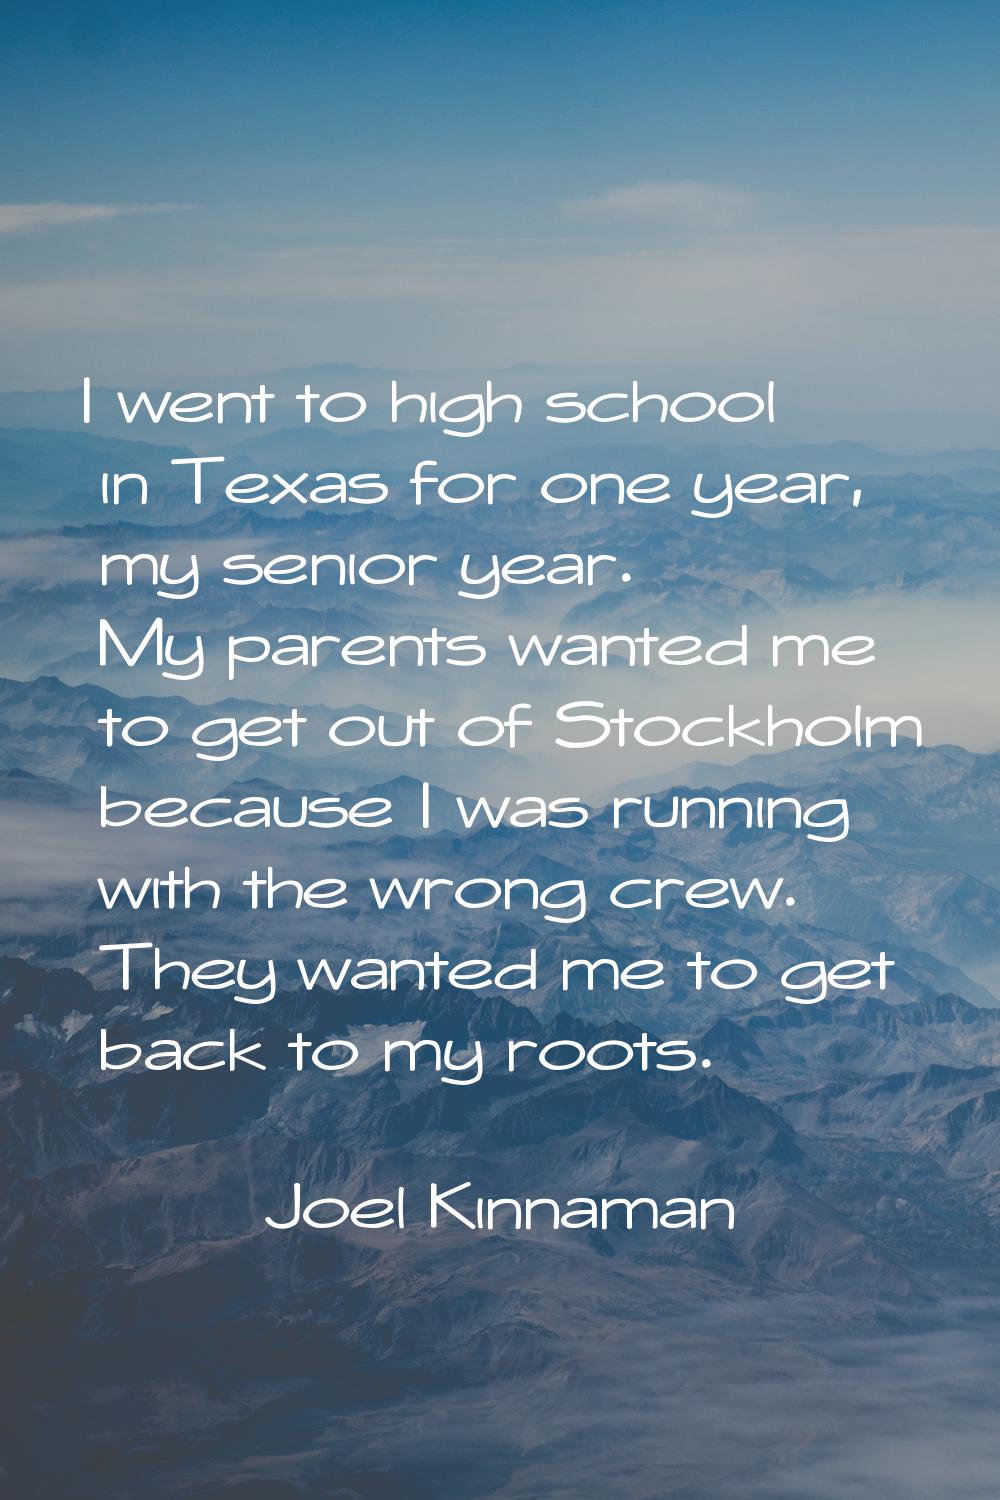 I went to high school in Texas for one year, my senior year. My parents wanted me to get out of Sto